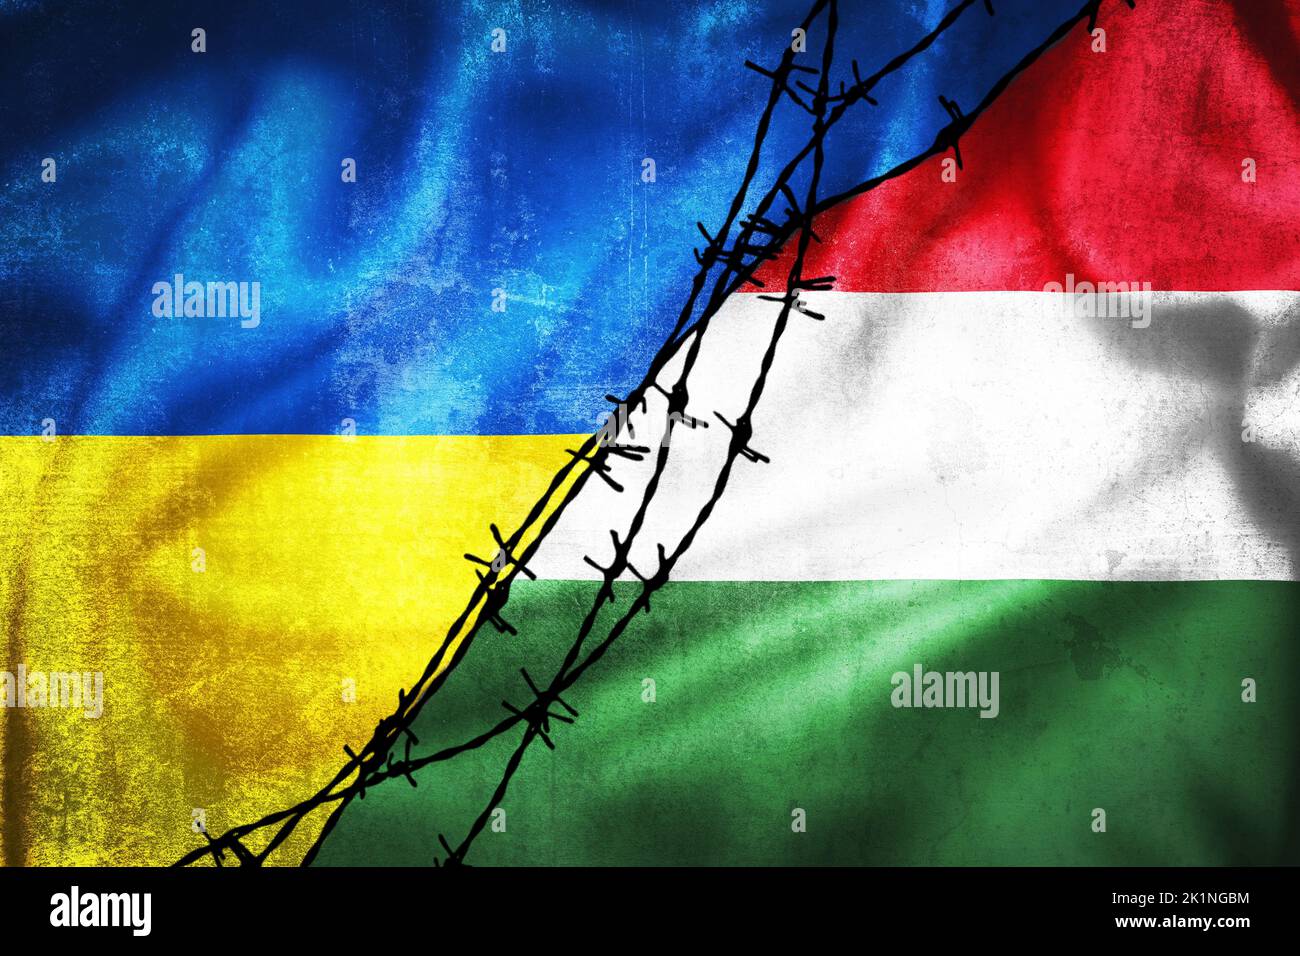 Grunge flags of Ukraine and Hungary divided by barb wire illustration, concept of tense relations between two countries Stock Photo